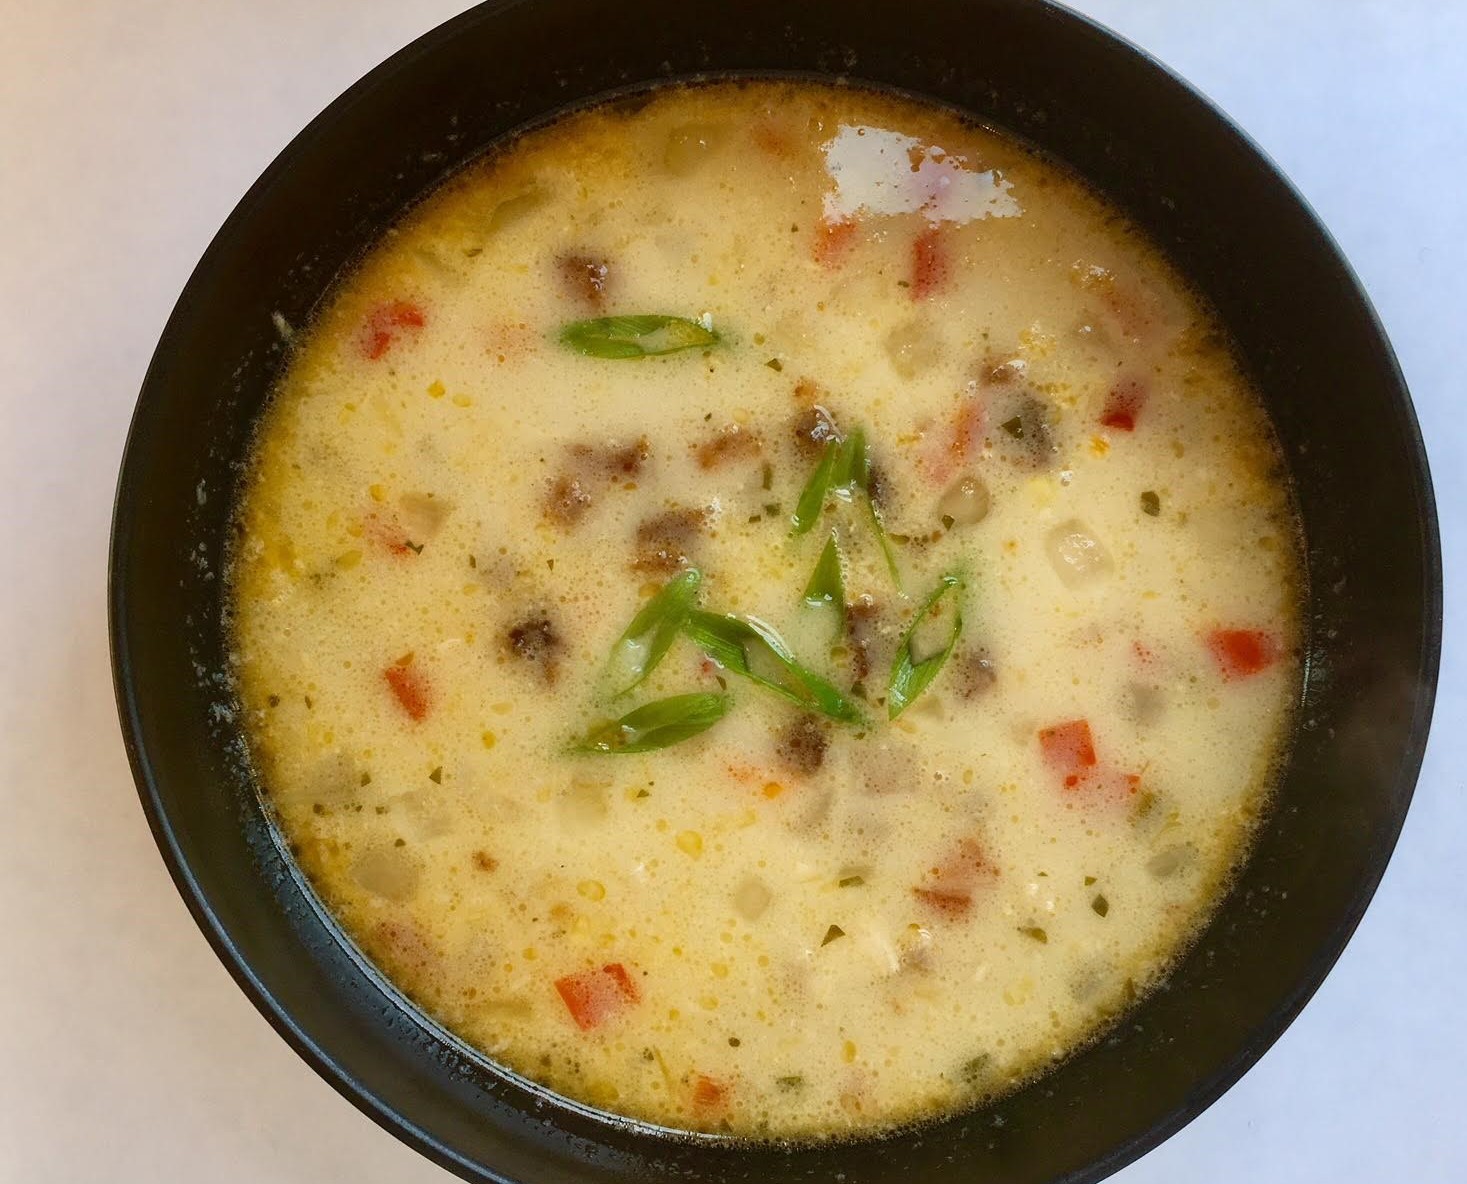 Corn chowder from the Bachelor Farmer's daytime cafe.